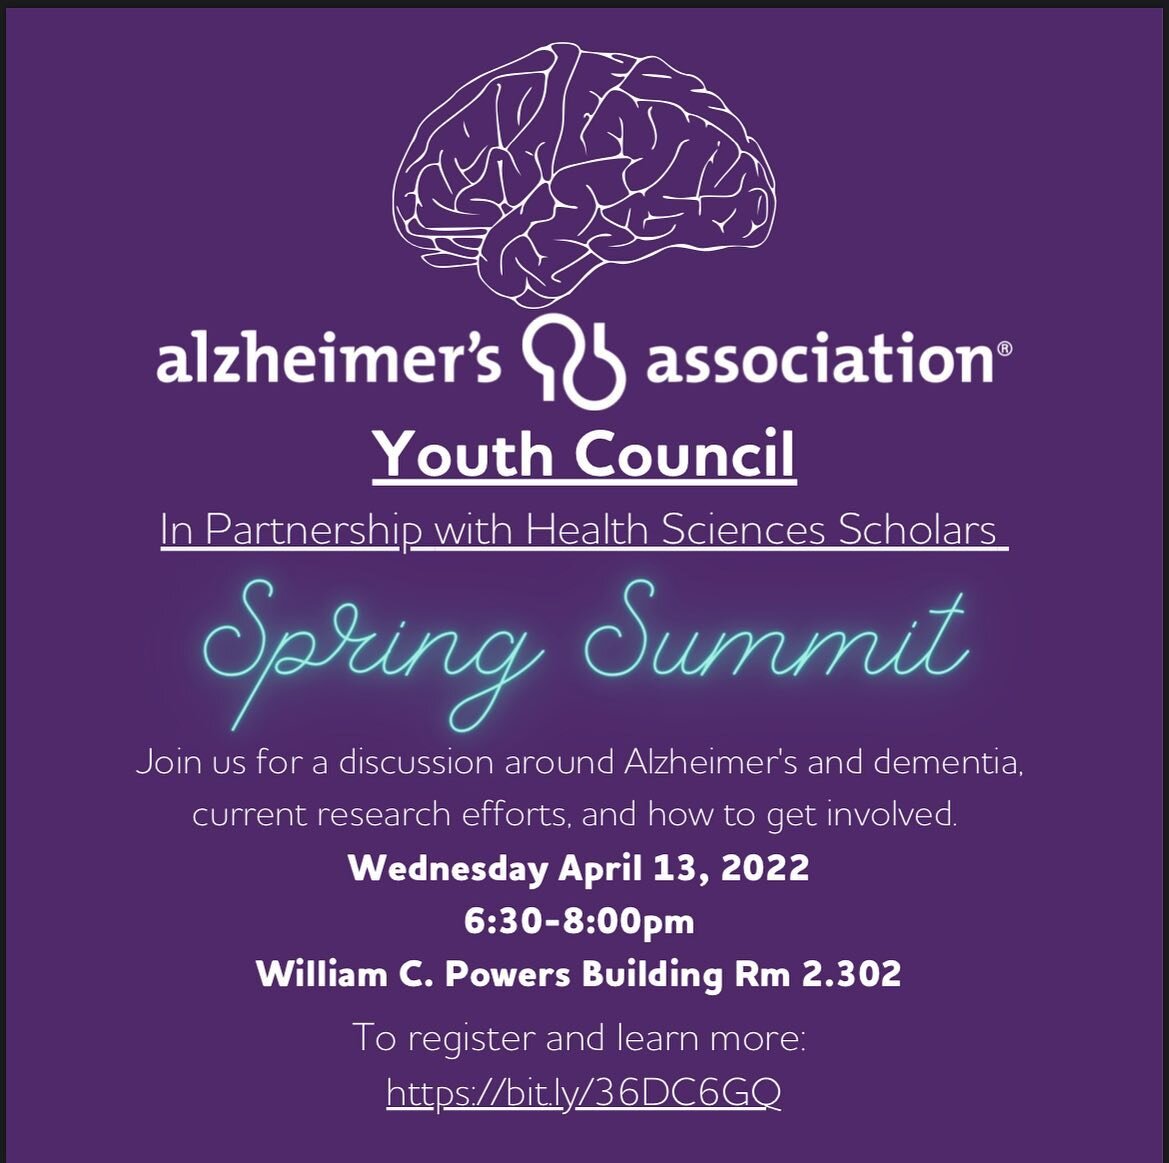 HSS is cohosting with the Alzheimer&rsquo;s Association Youth Council to host the spring summit next Wednesday (4/13) from 6:30-8pm in the WCP Rm 2.302. Come learn about current advocacy efforts and ongoing research developments. There&rsquo;s even f